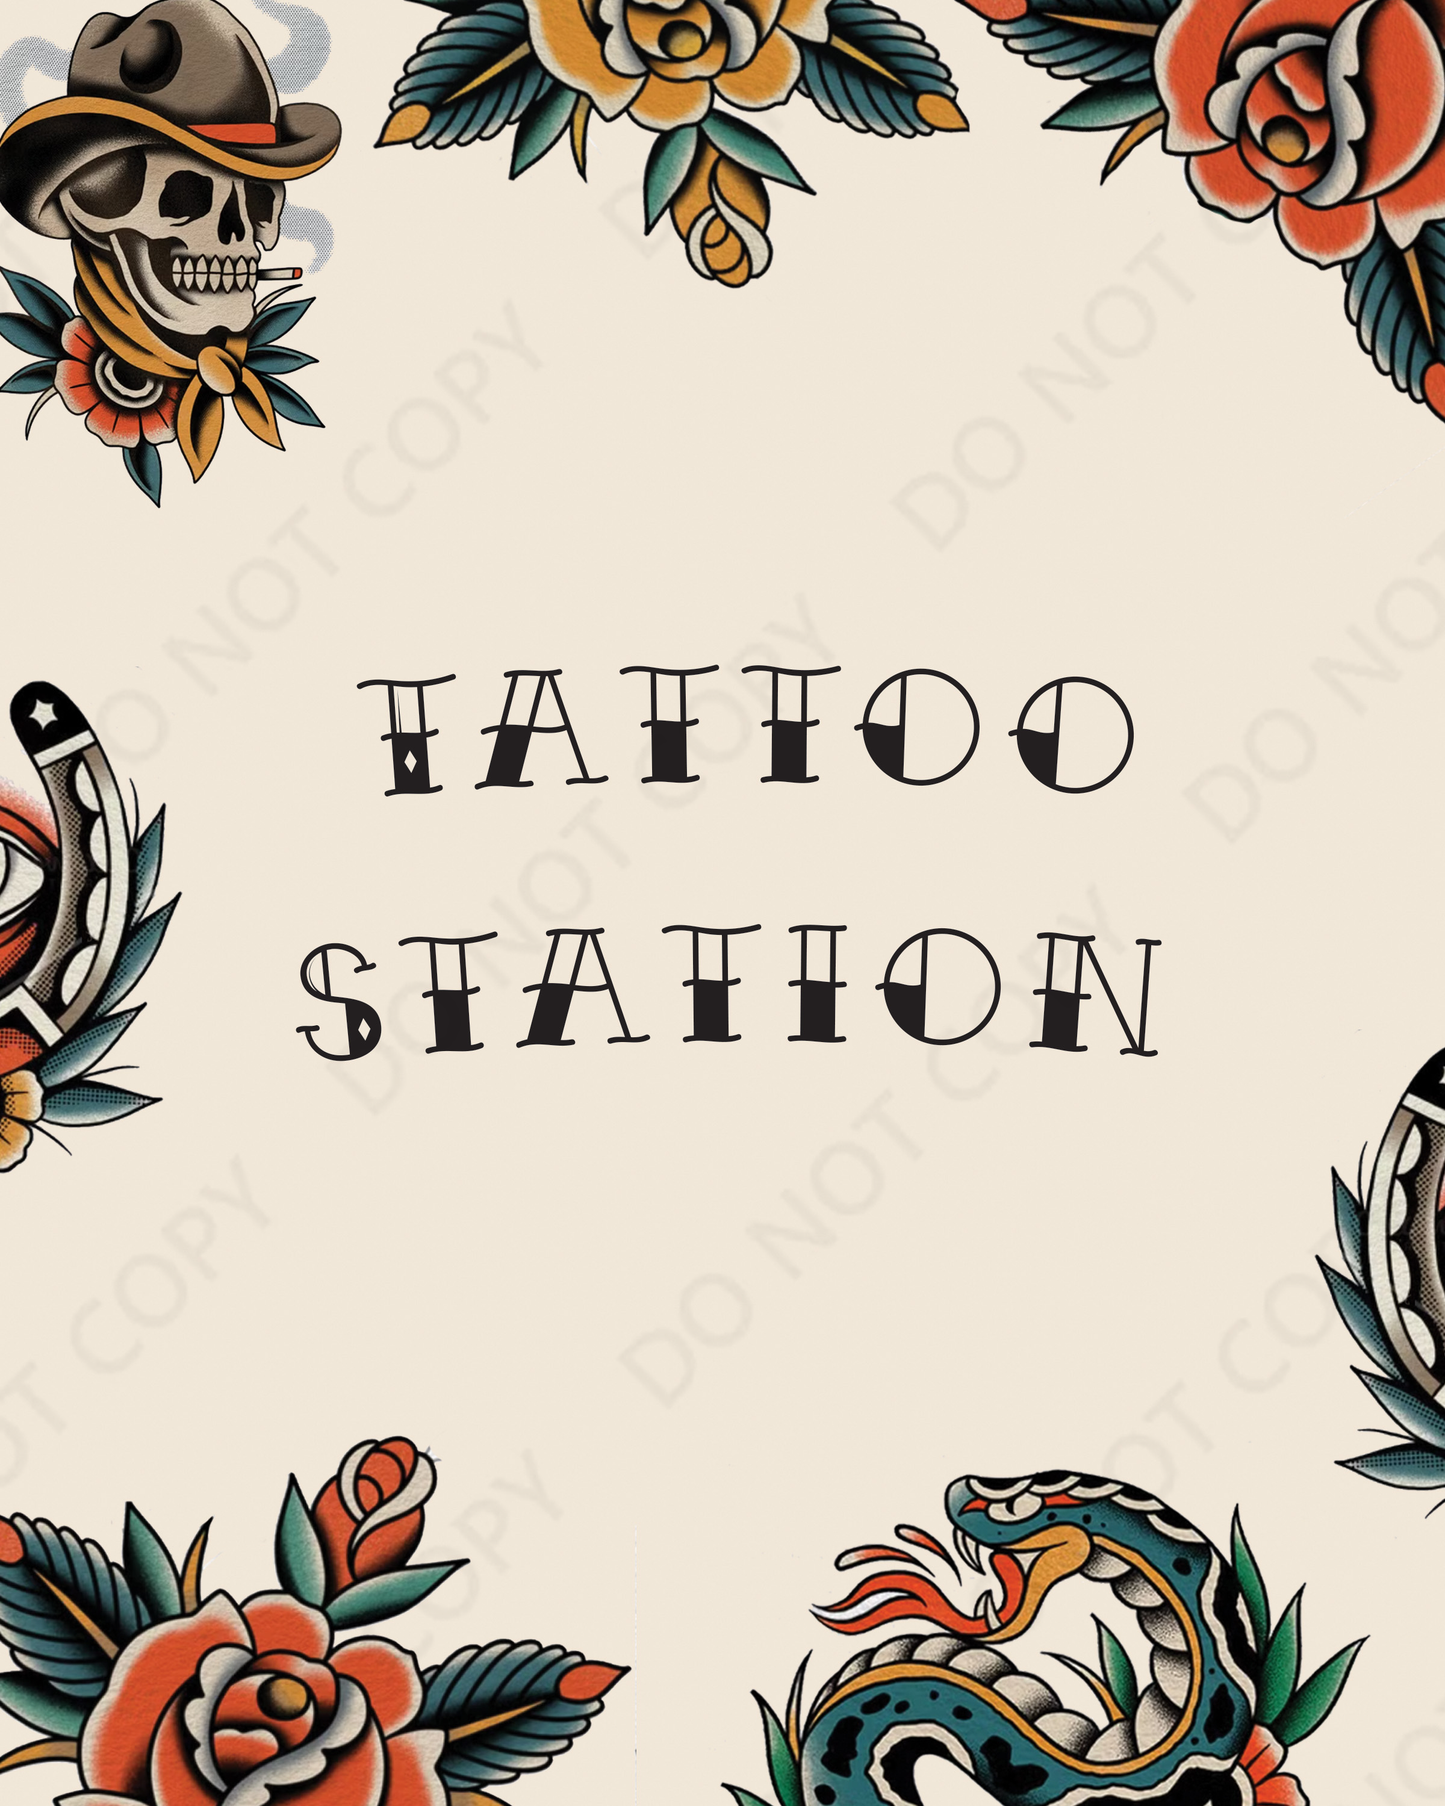 Tattoo station print out for alt wedding or party